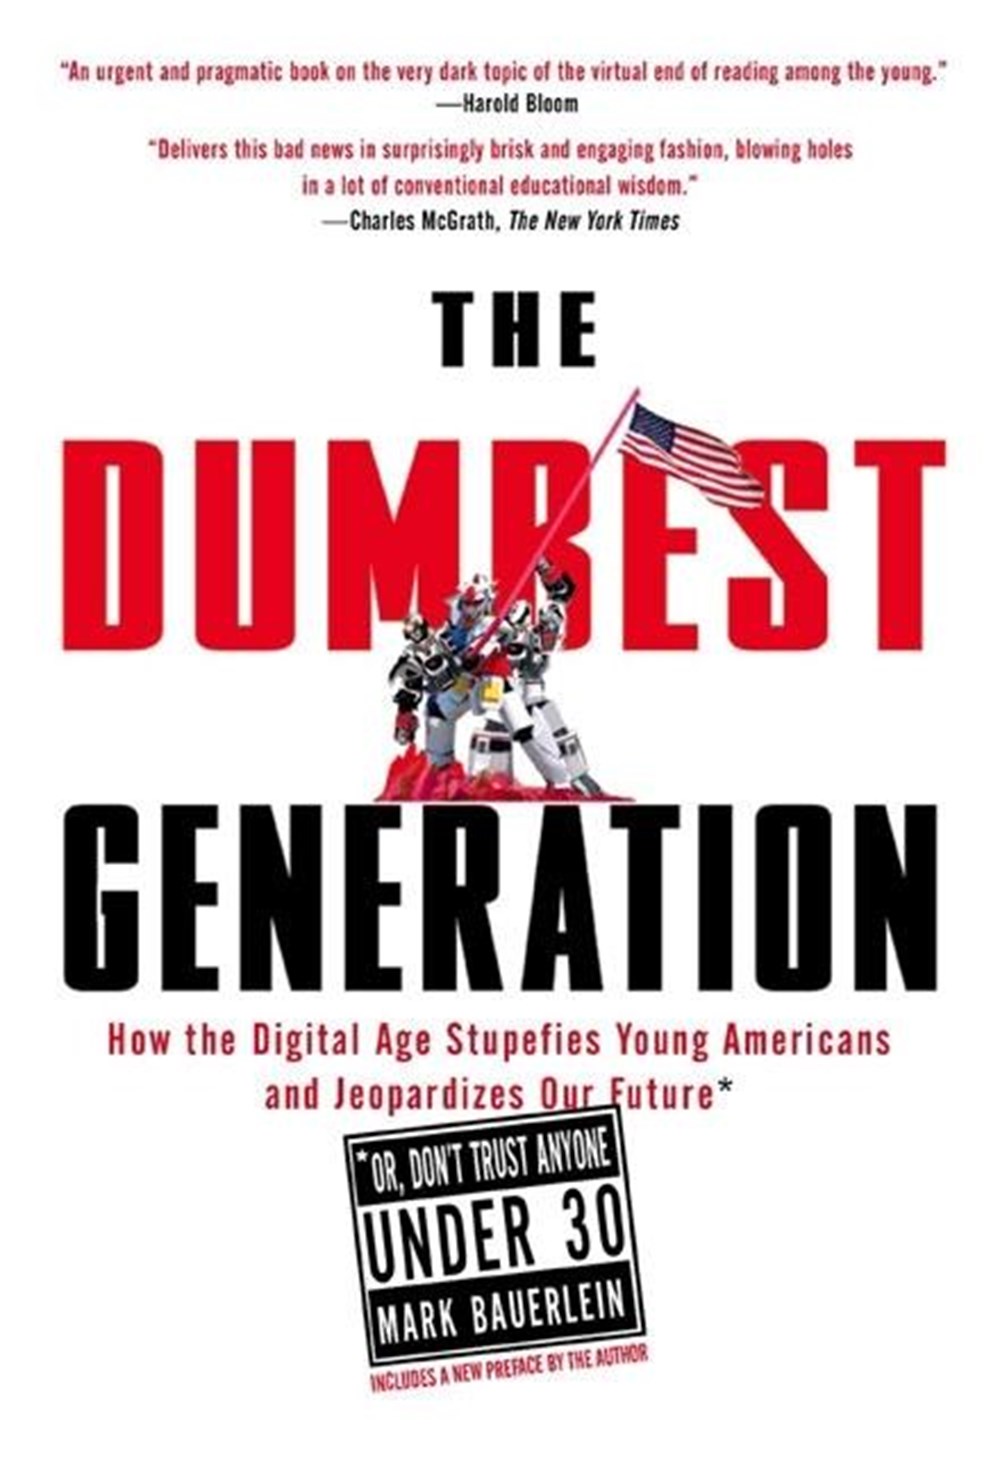 Dumbest Generation: How the Digital Age Stupefies Young Americans and Jeopardizes Our Future(or, Don